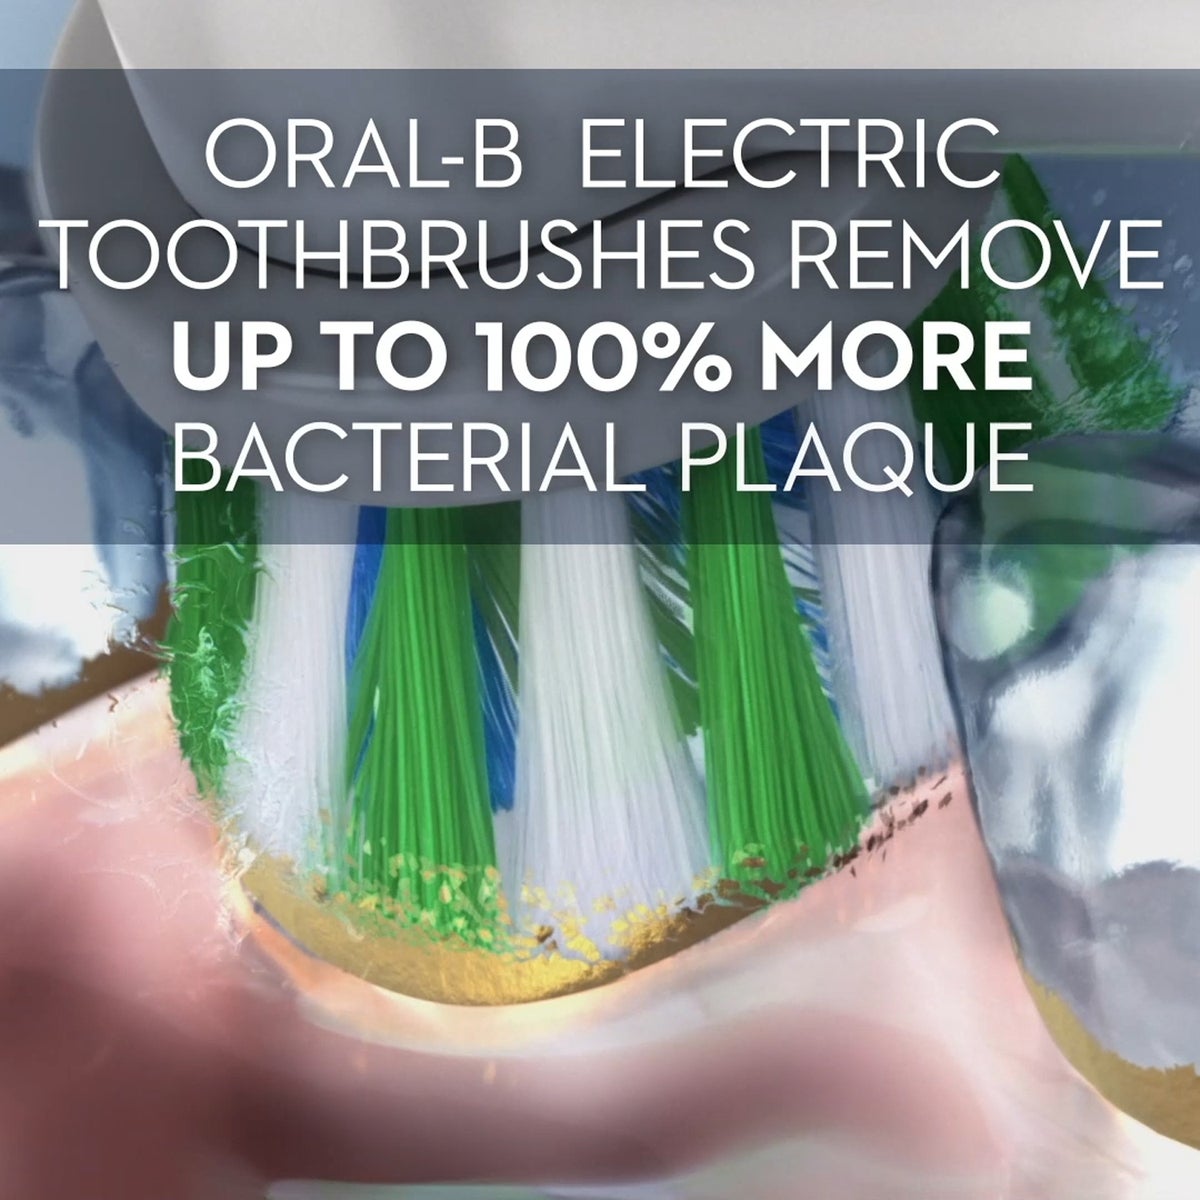 Oral-B Electric Toothbrush remove up to 100% more bacterial plaque